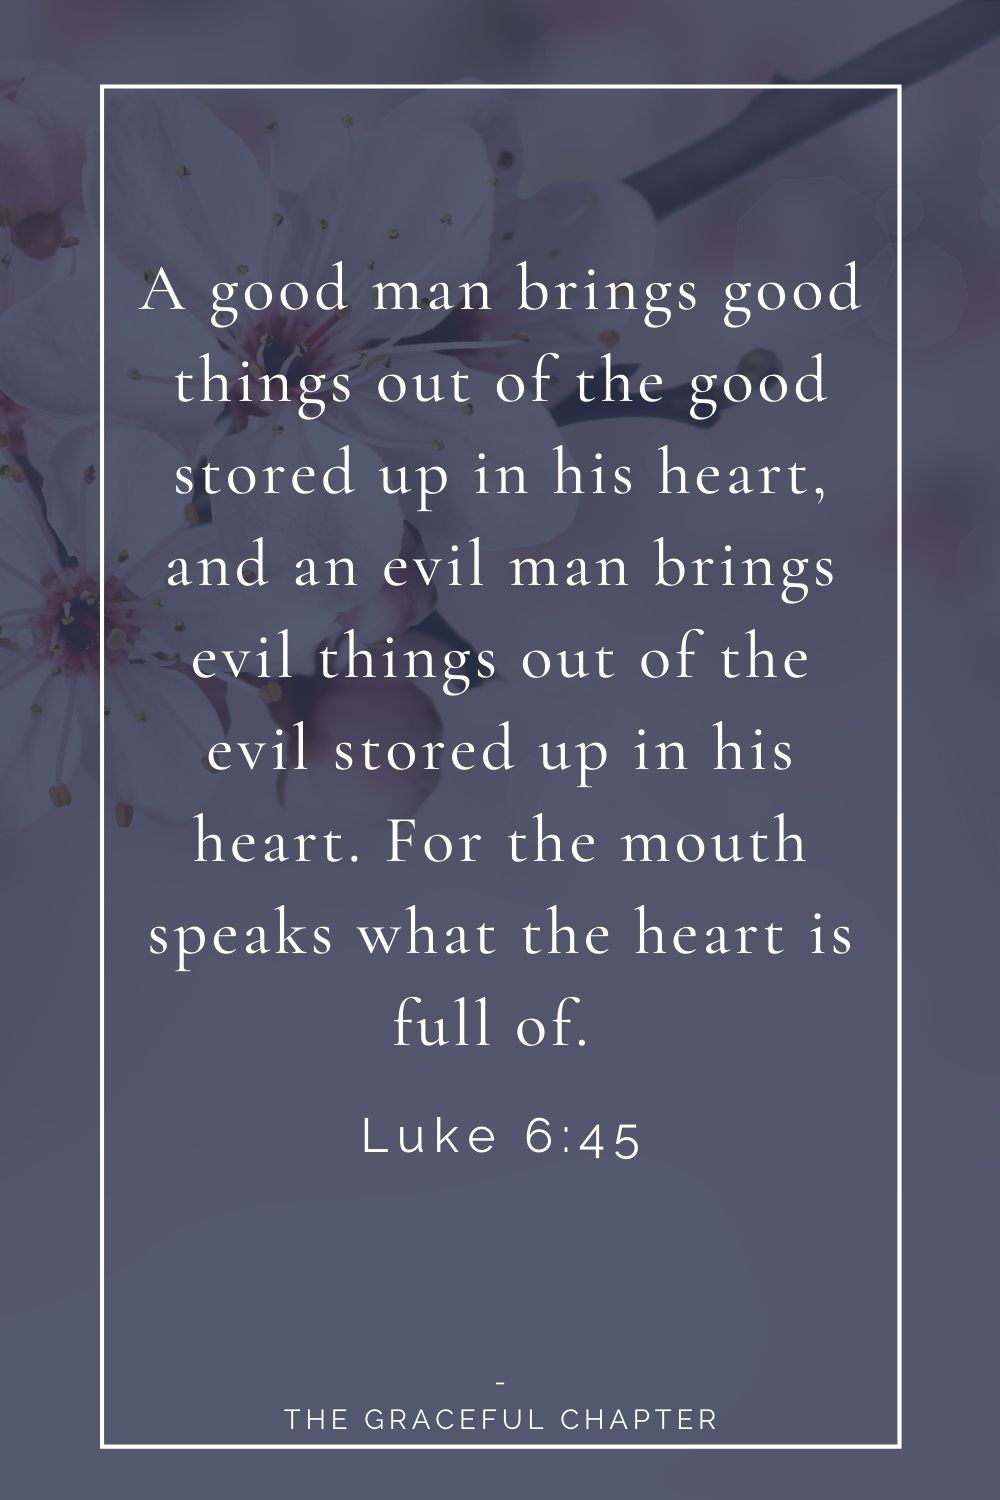 A good man brings good things out of the good stored up in his heart, and an evil man brings evil things out of the evil stored up in his heart. For the mouth speaks what the heart is full of.  Luke 6:45